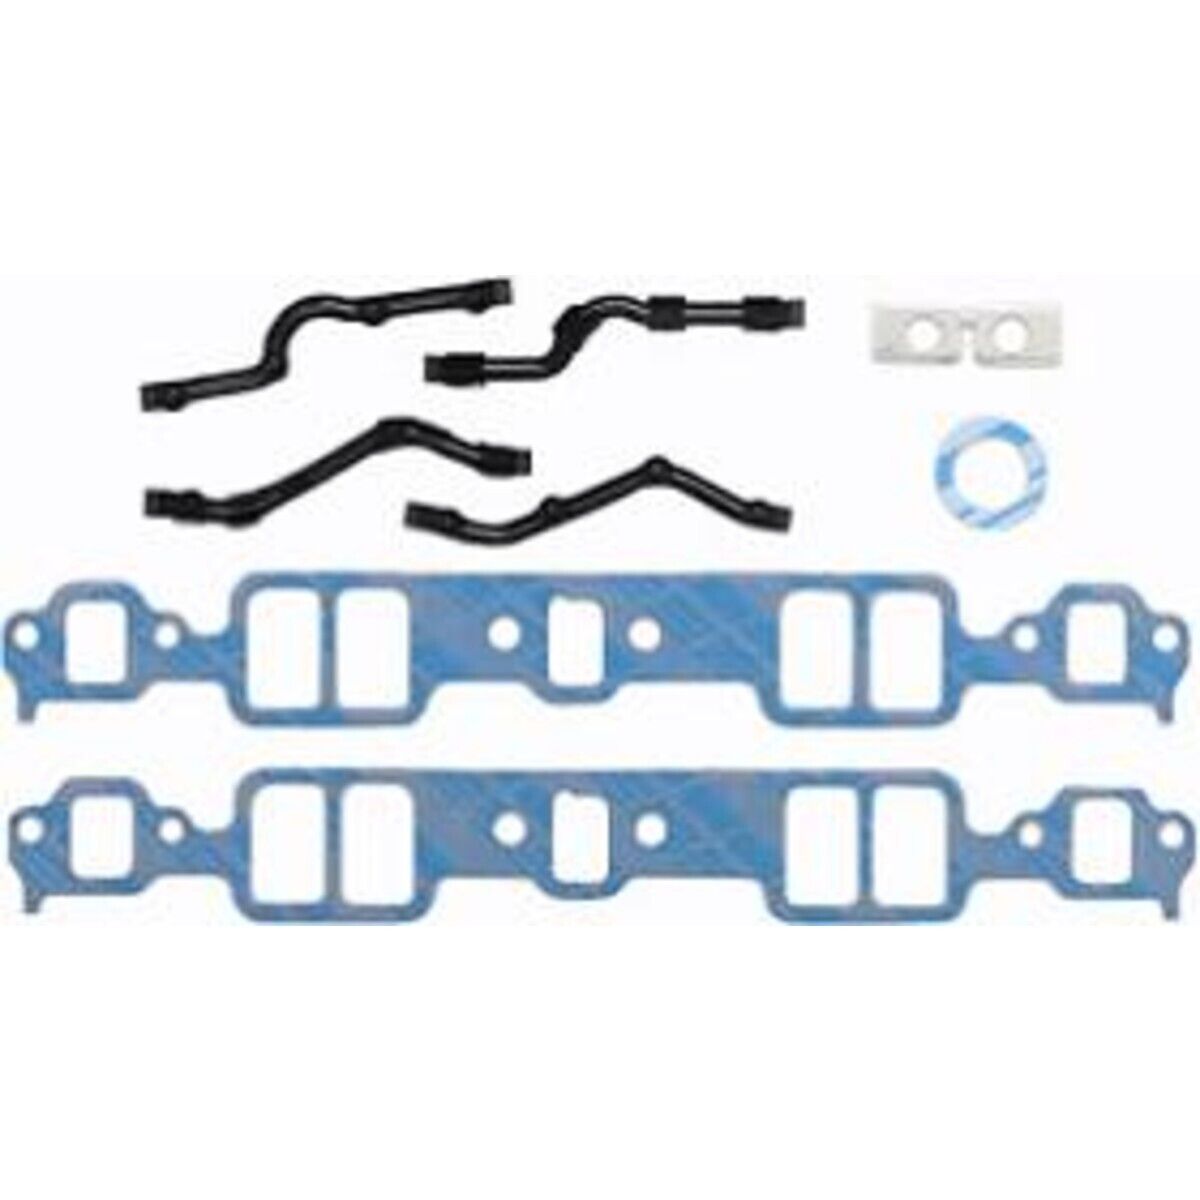 MS 90314-2 Felpro Intake Manifold Gaskets Set Lower for Chevy Le Sabre Suburban